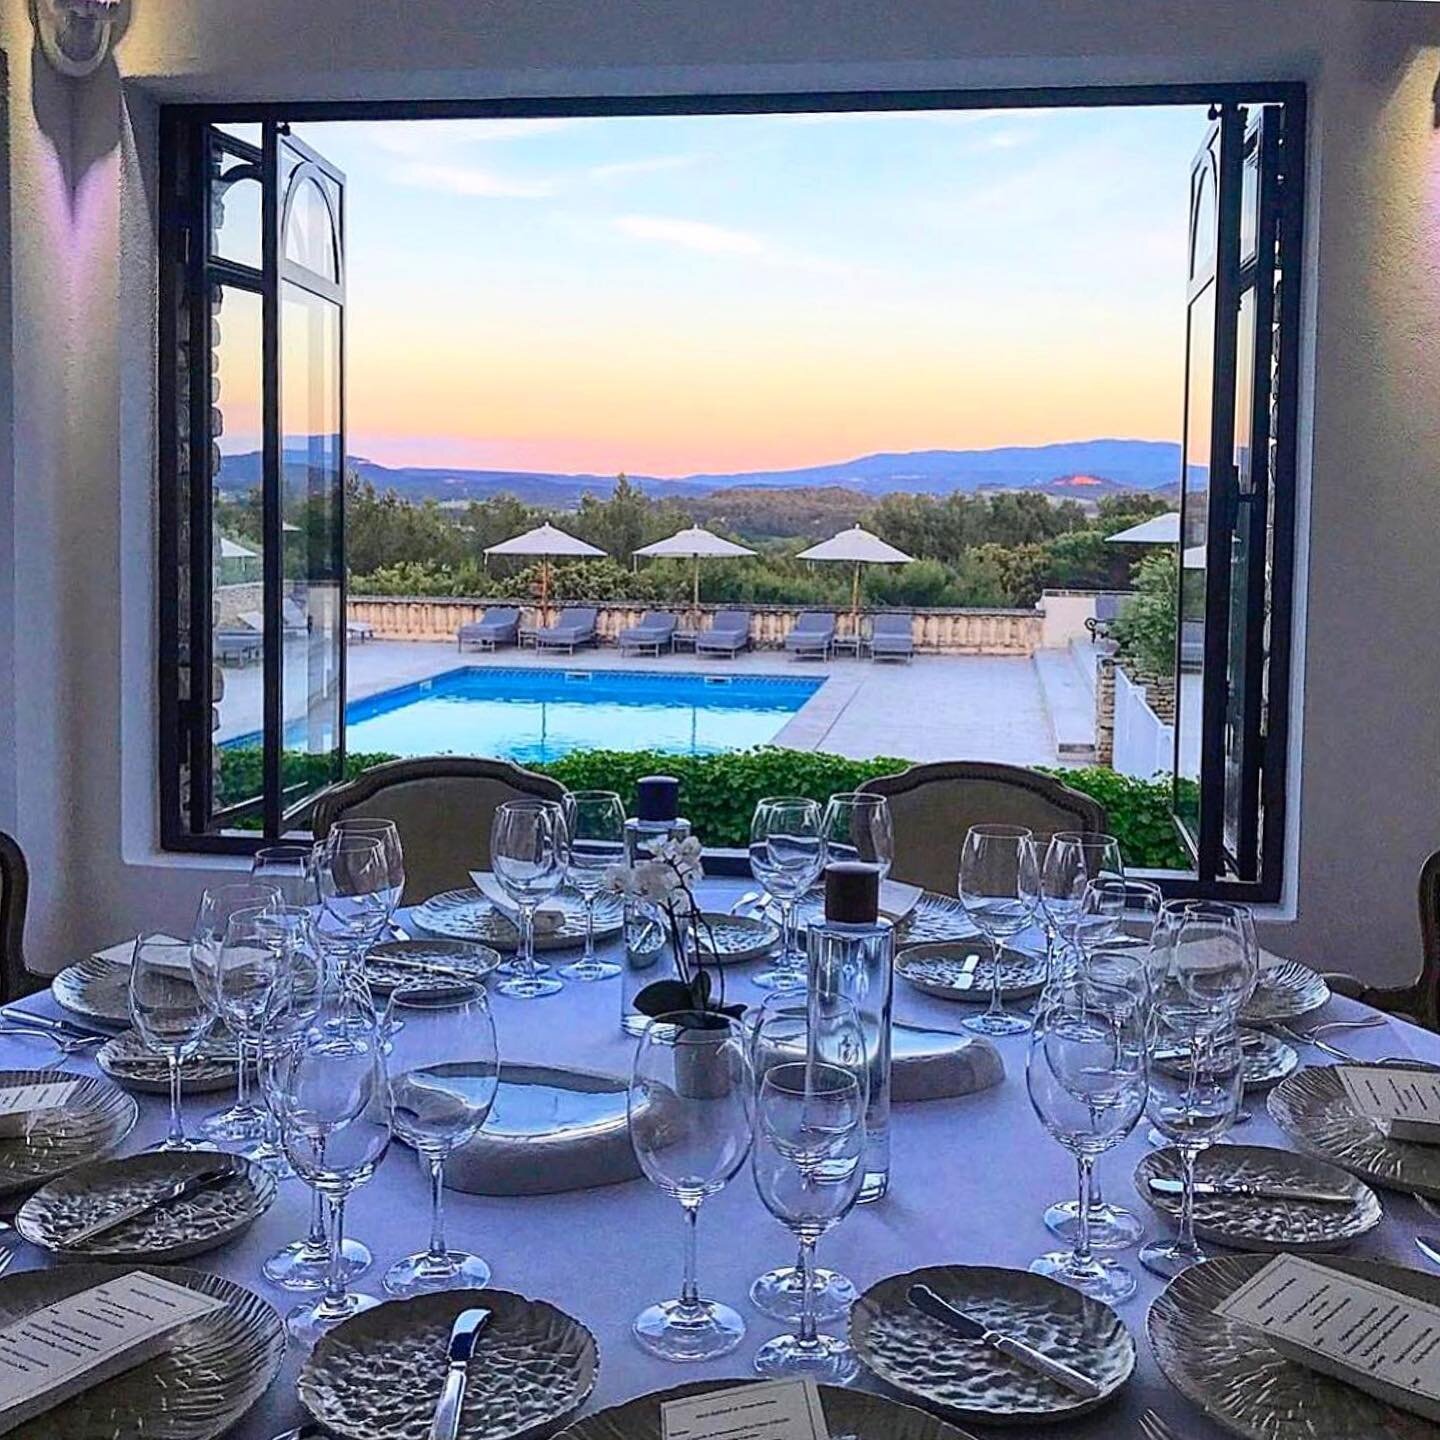 A gorgeous night at the 5 sat hotel  @lephebus, Lub&eacute;ron, France. 
&bull;&bull;&bull;&bull;&bull;&bull;

📸 @lkmorgenthaler

&bull;&bull;&bull;&bull;&bull;&bull;
Luxury Travel Planners  Road Trips  Healthy holidays  Yacht concierge services 📍M